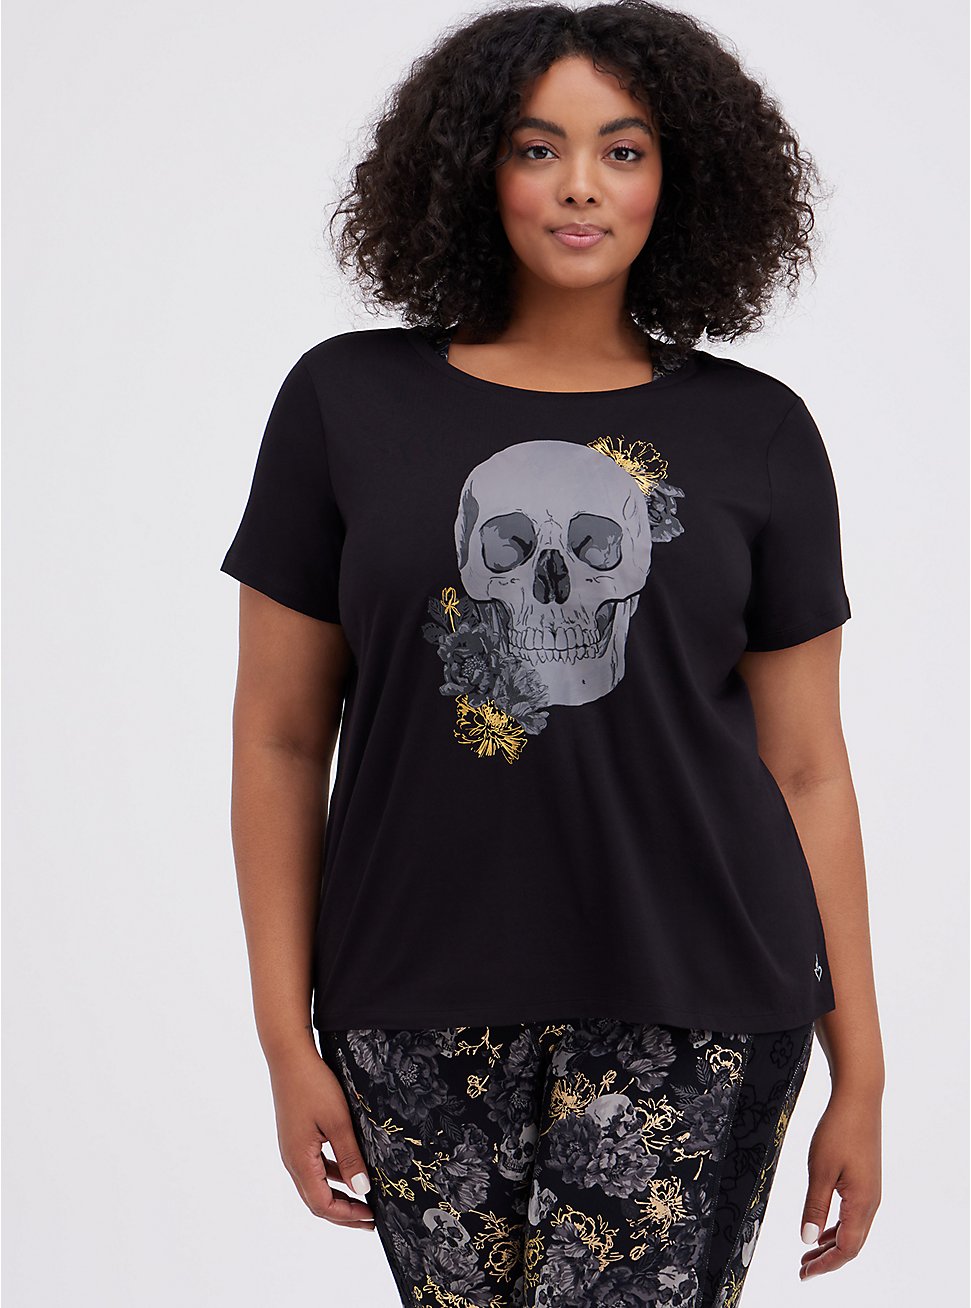 Plus Size Wicking Active Tee - Performance Cotton Skull Floral Black, DEEP BLACK, hi-res